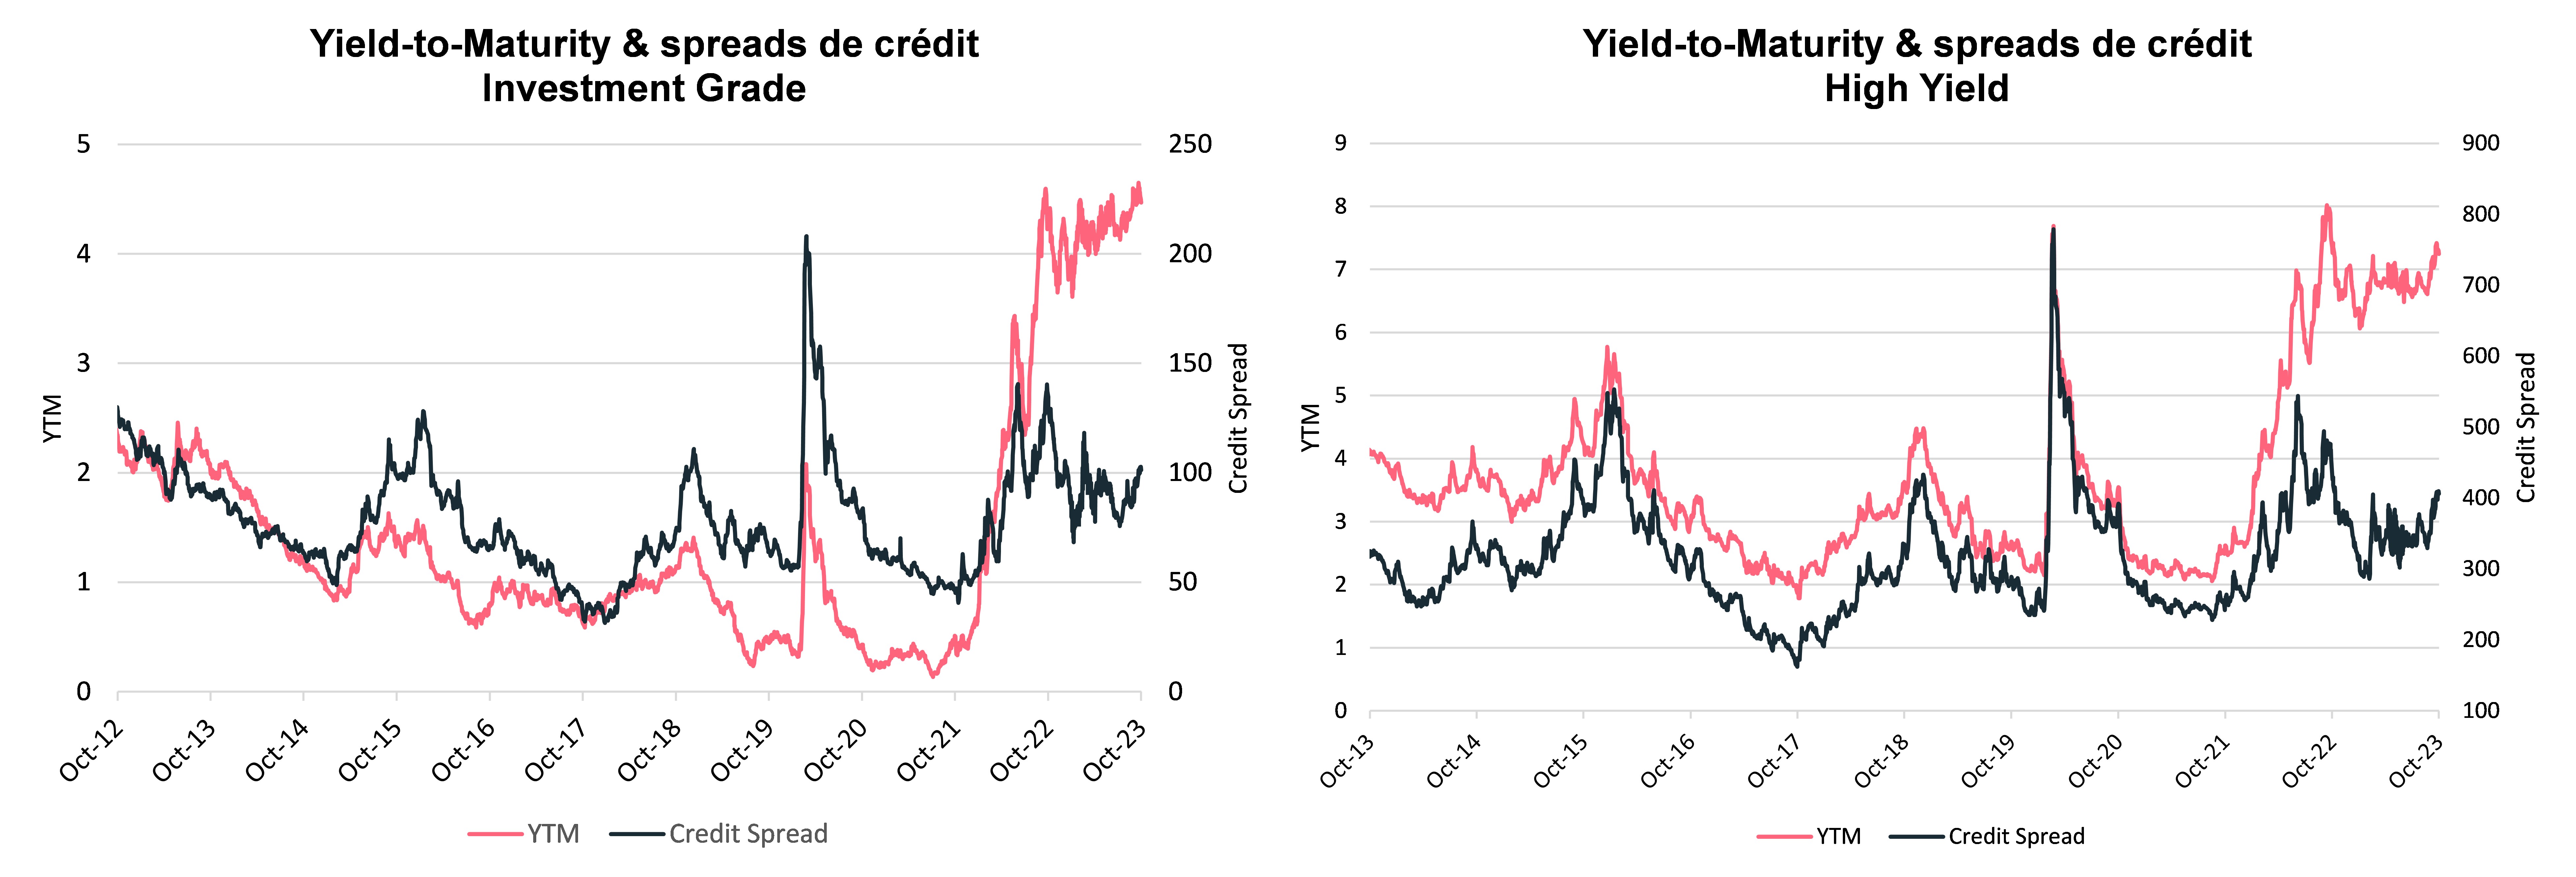 yield-to-maturity-et-spreads-de-credit-investment-garde-et-high-yield